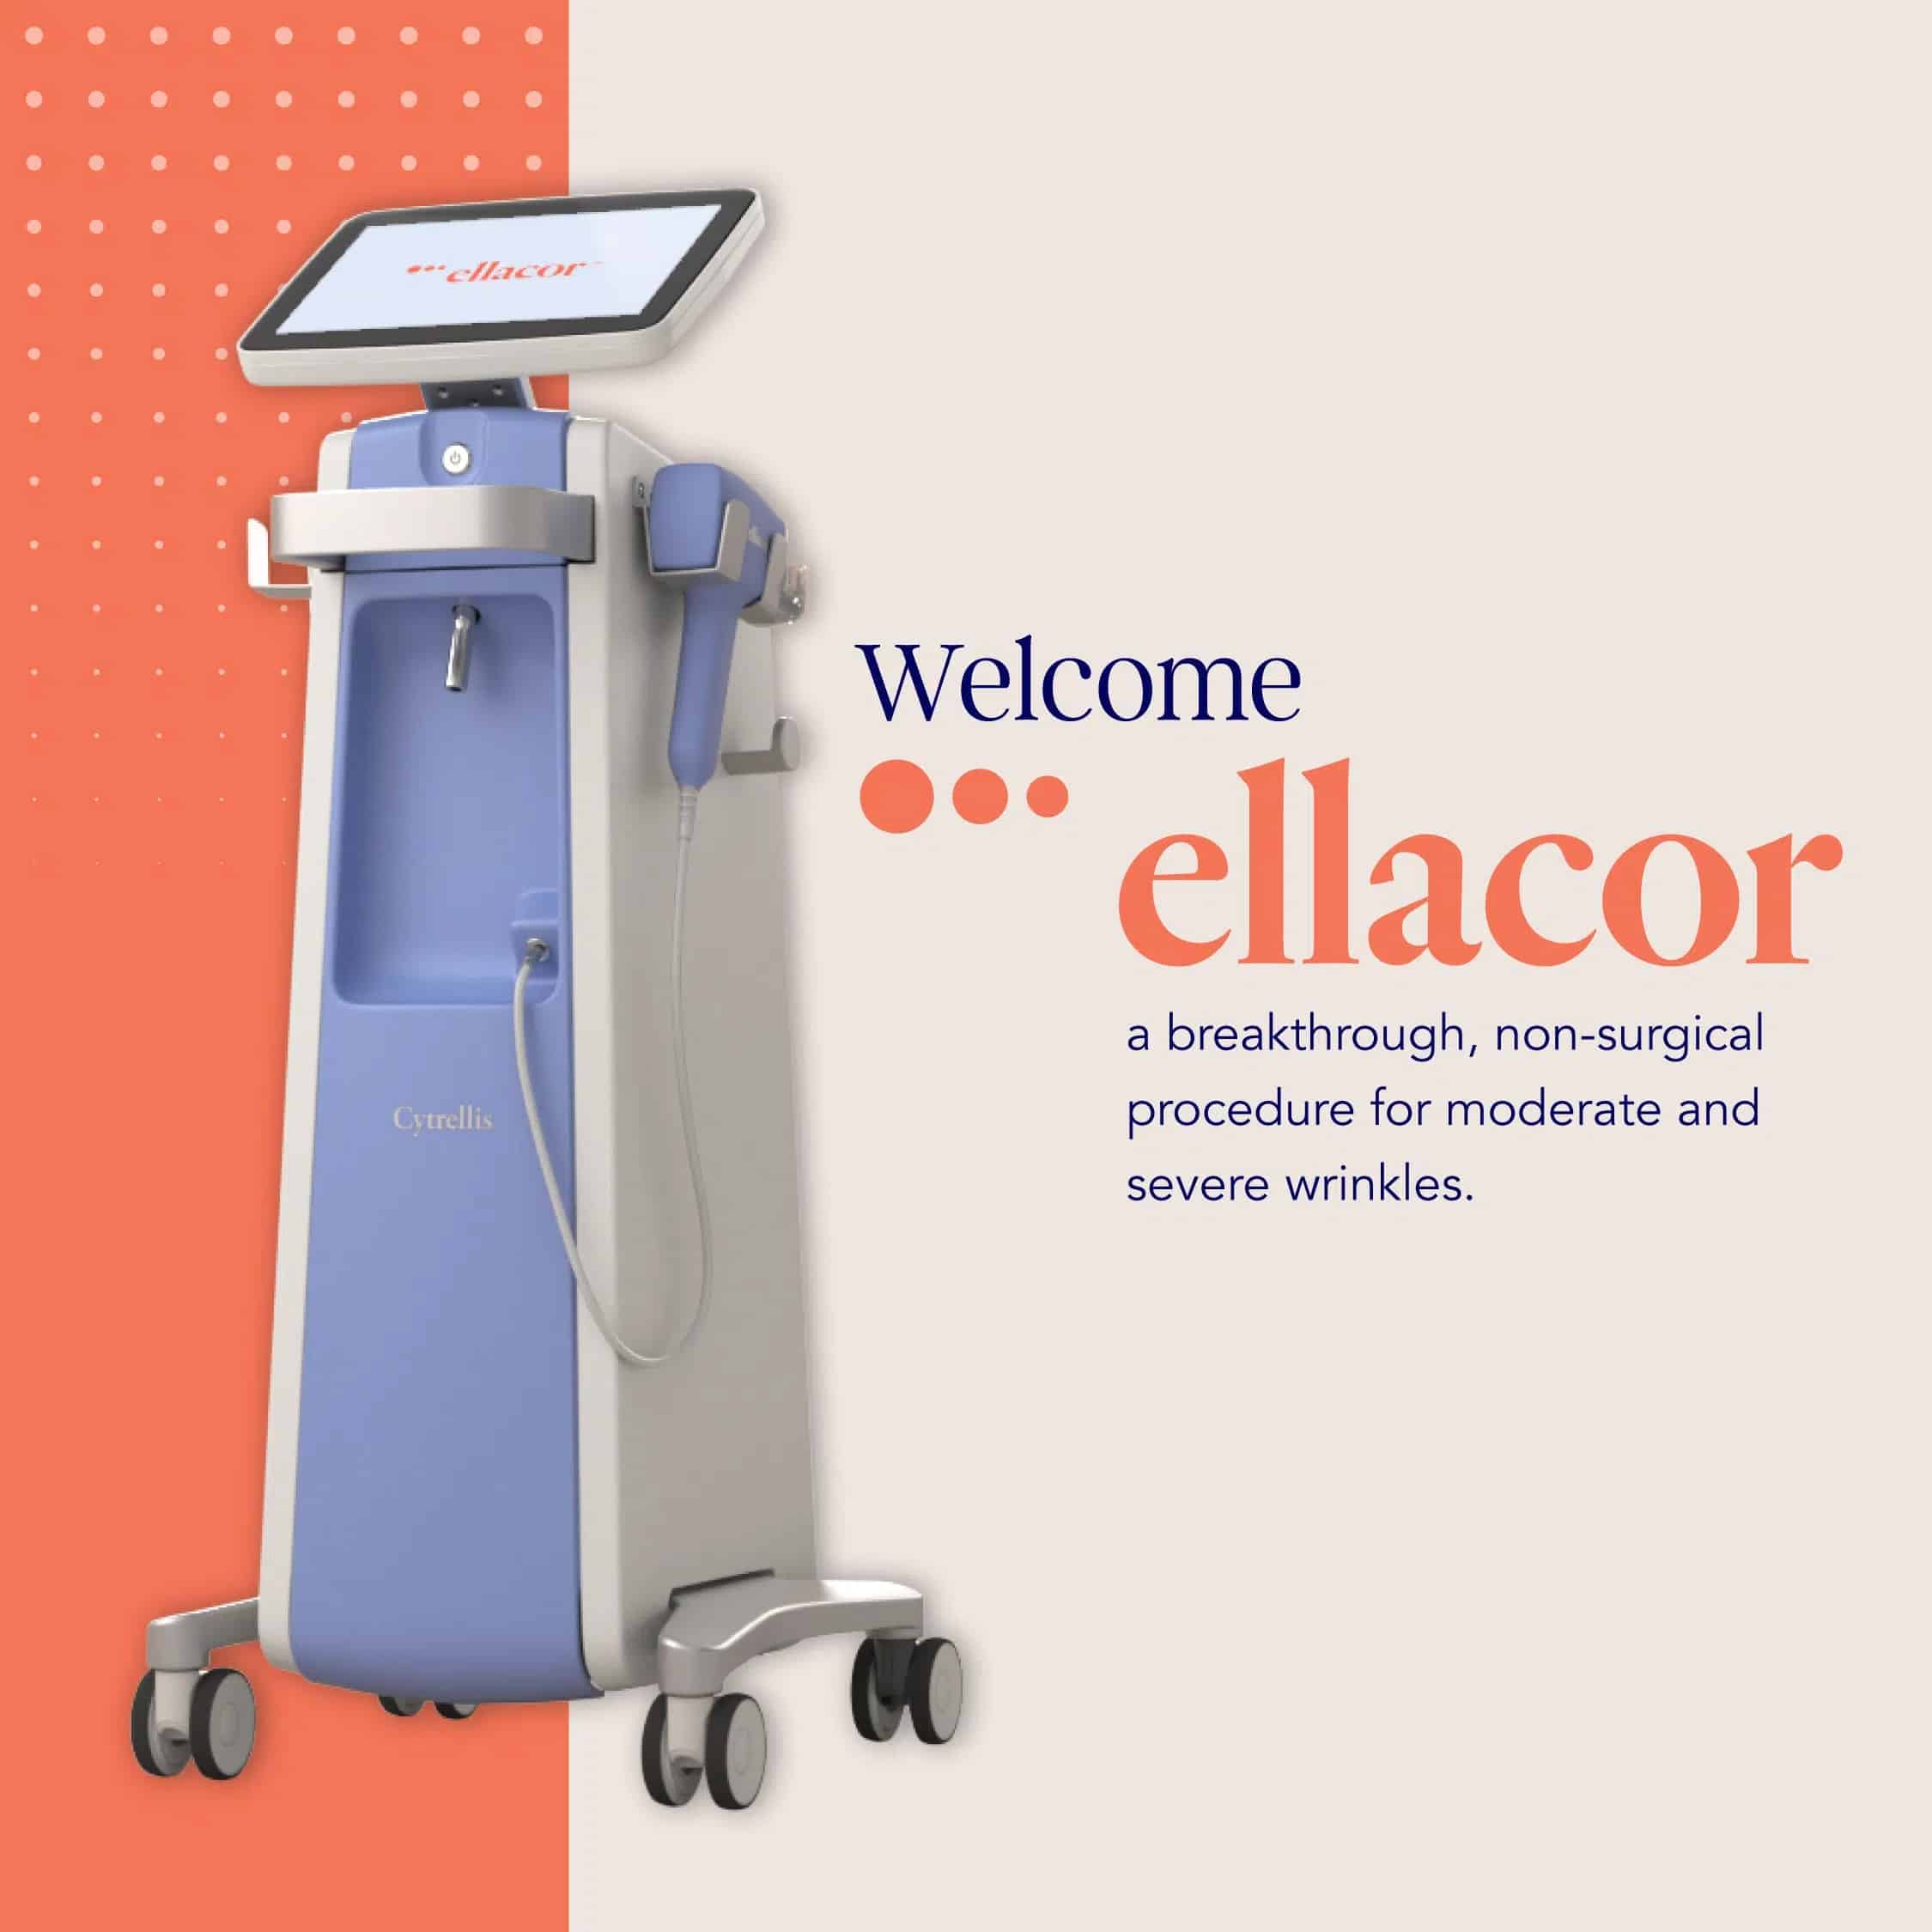 001 Welcome ellacor.png